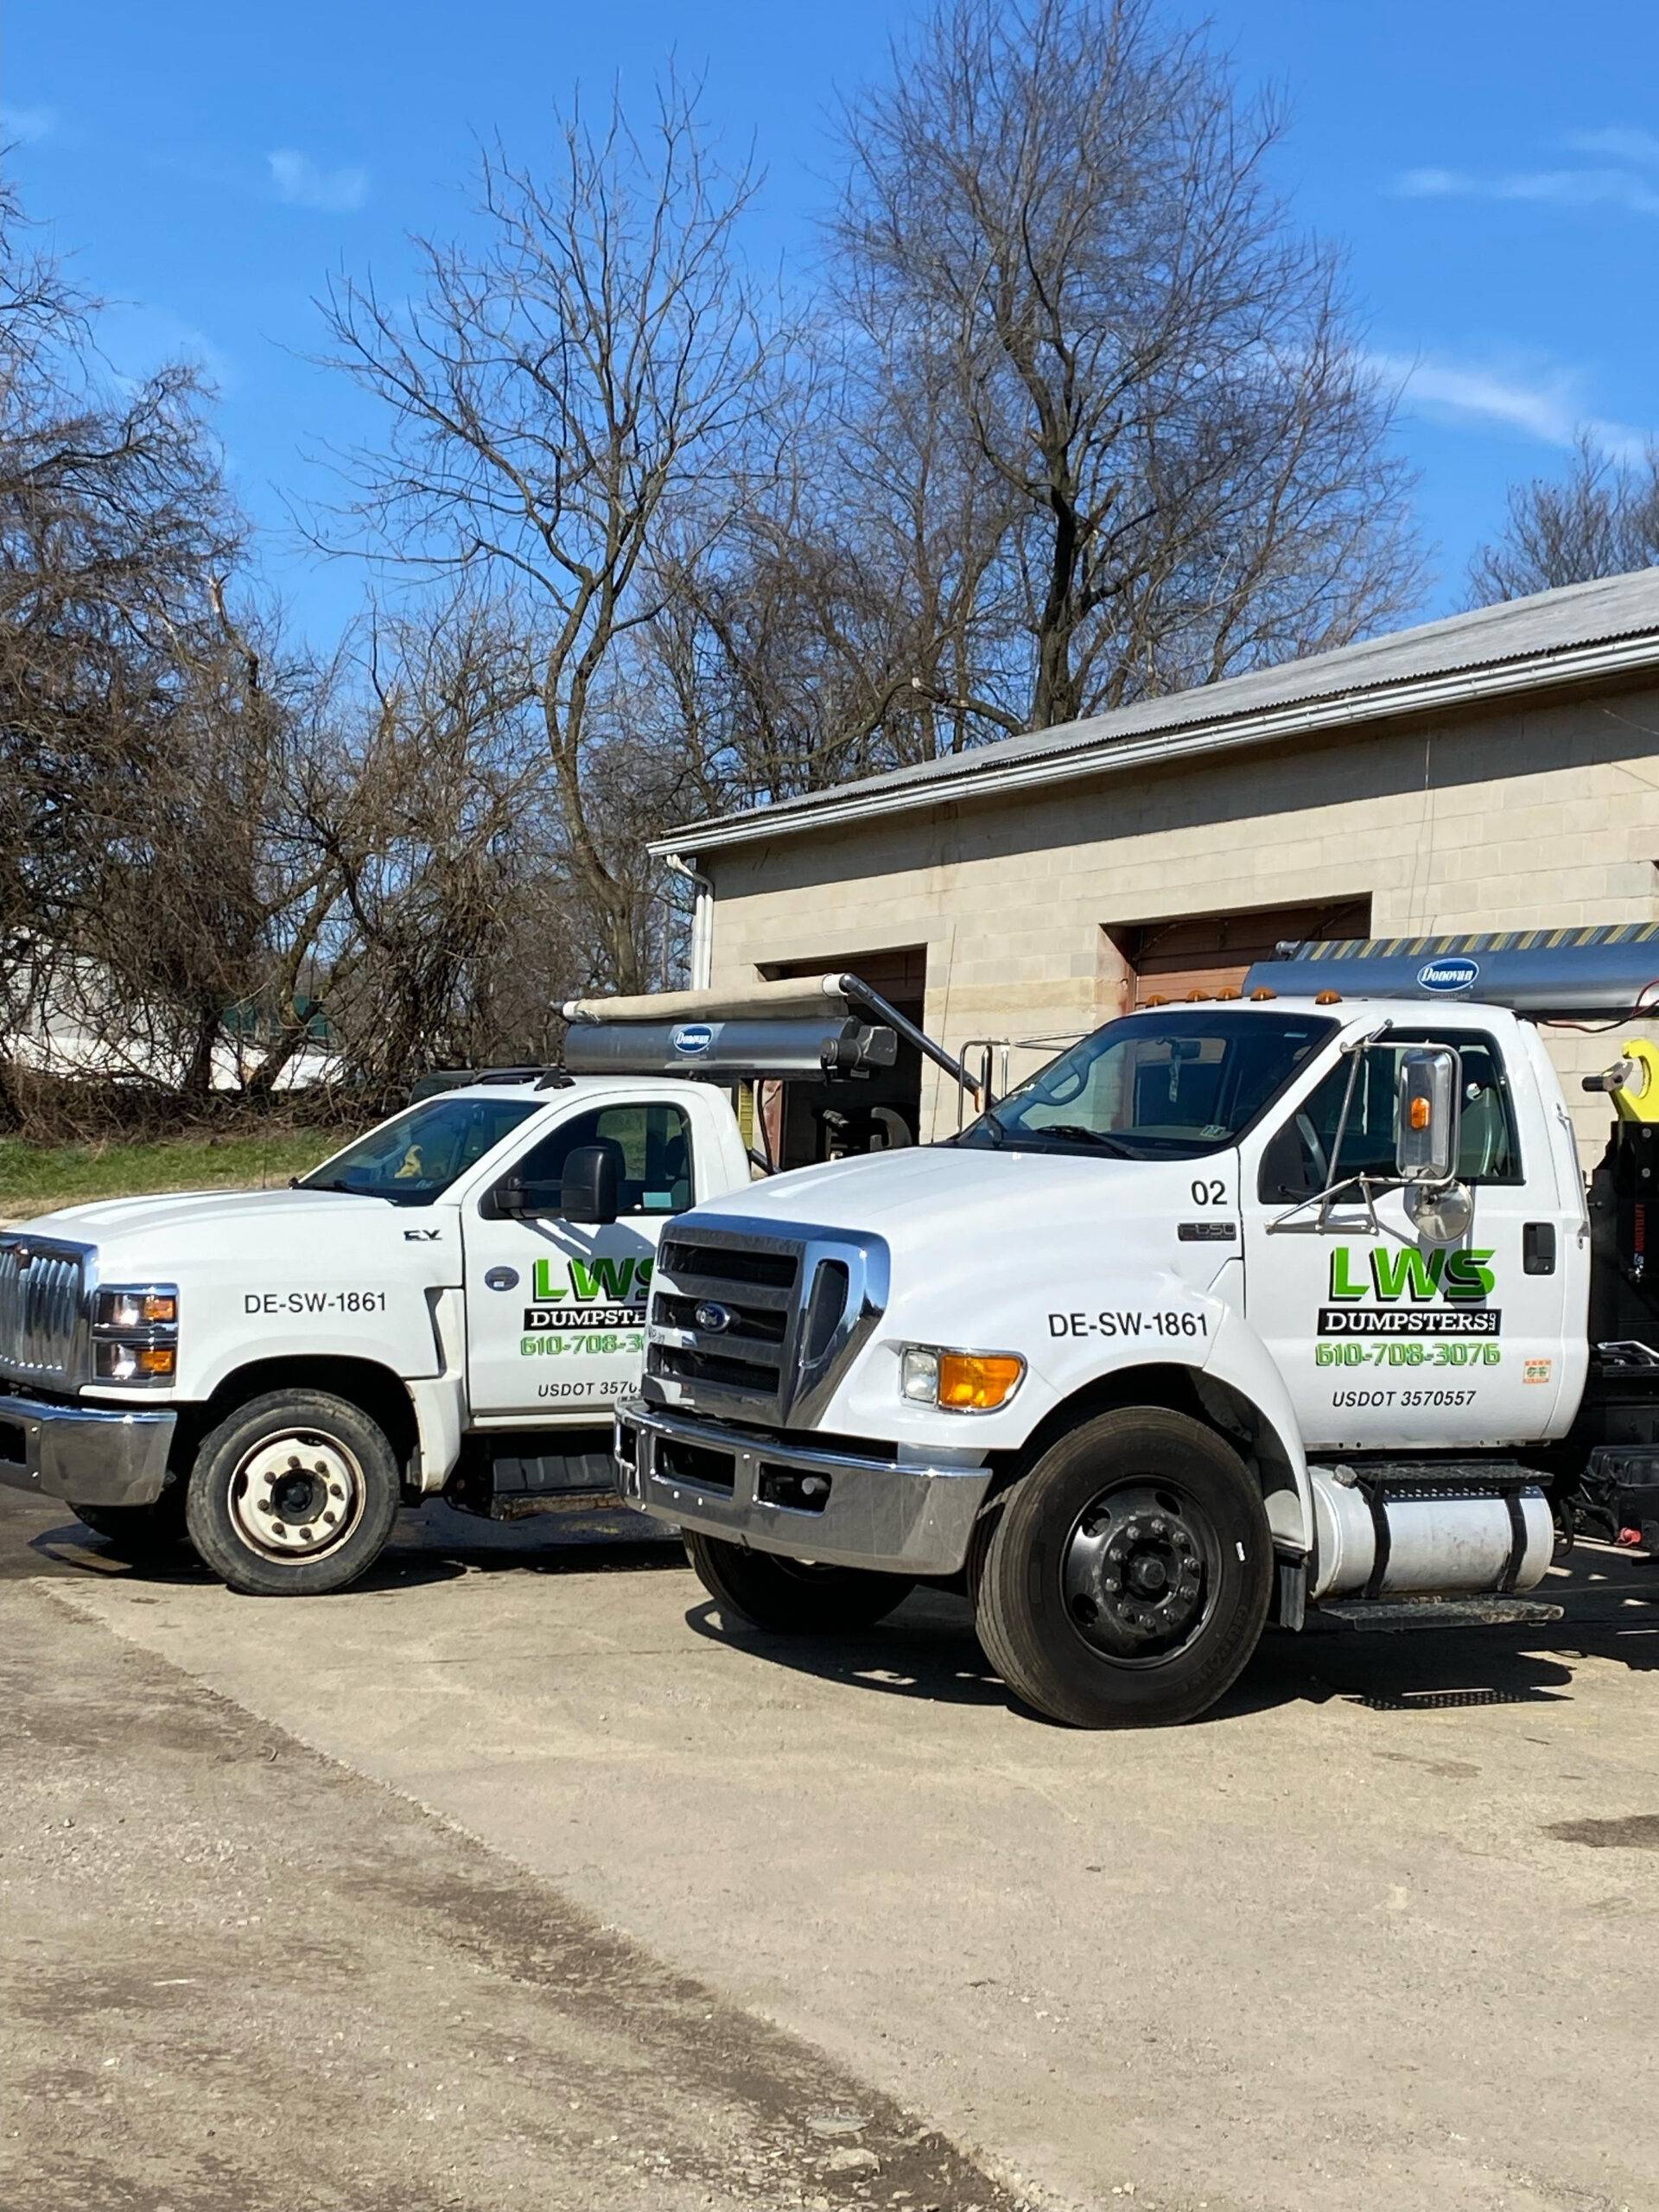 Dumpster Rental Company in Downingtown, PA